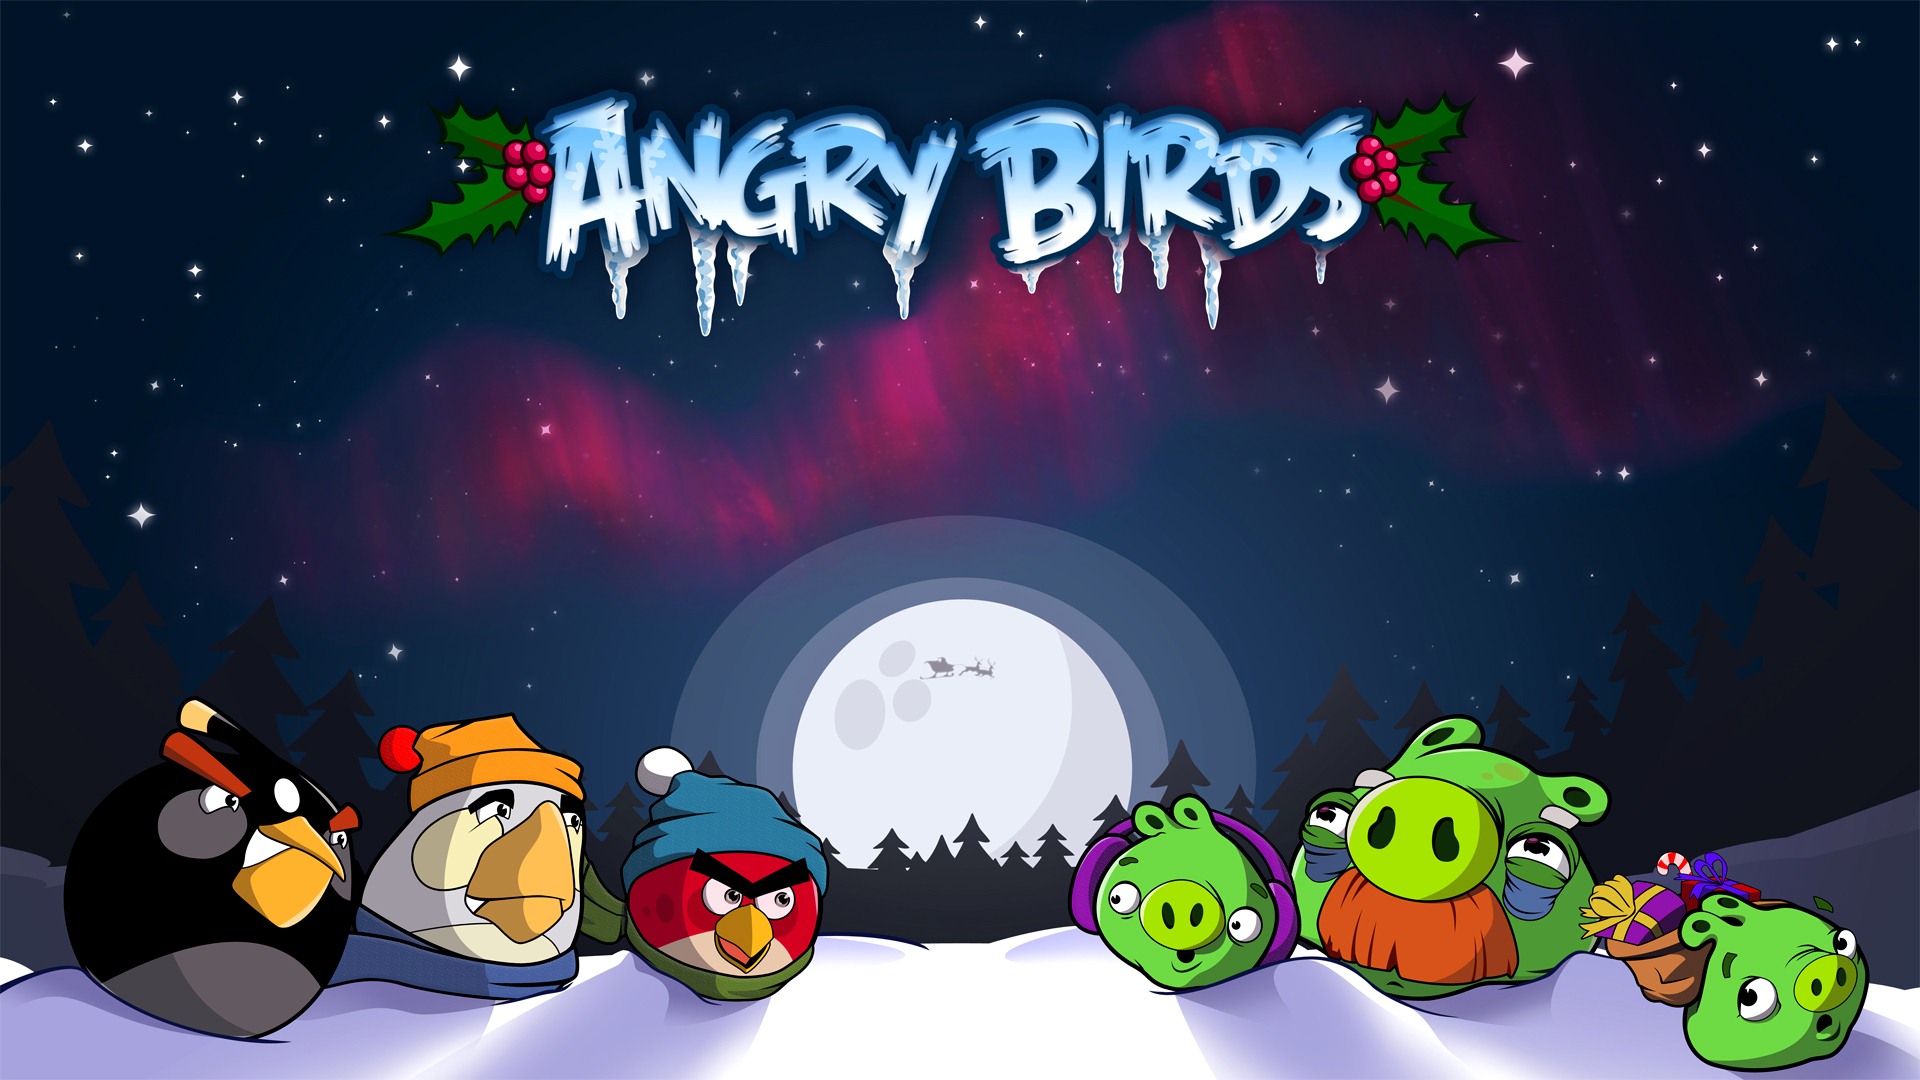 Angry Birds Game Wallpapers #27 - 1920x1080